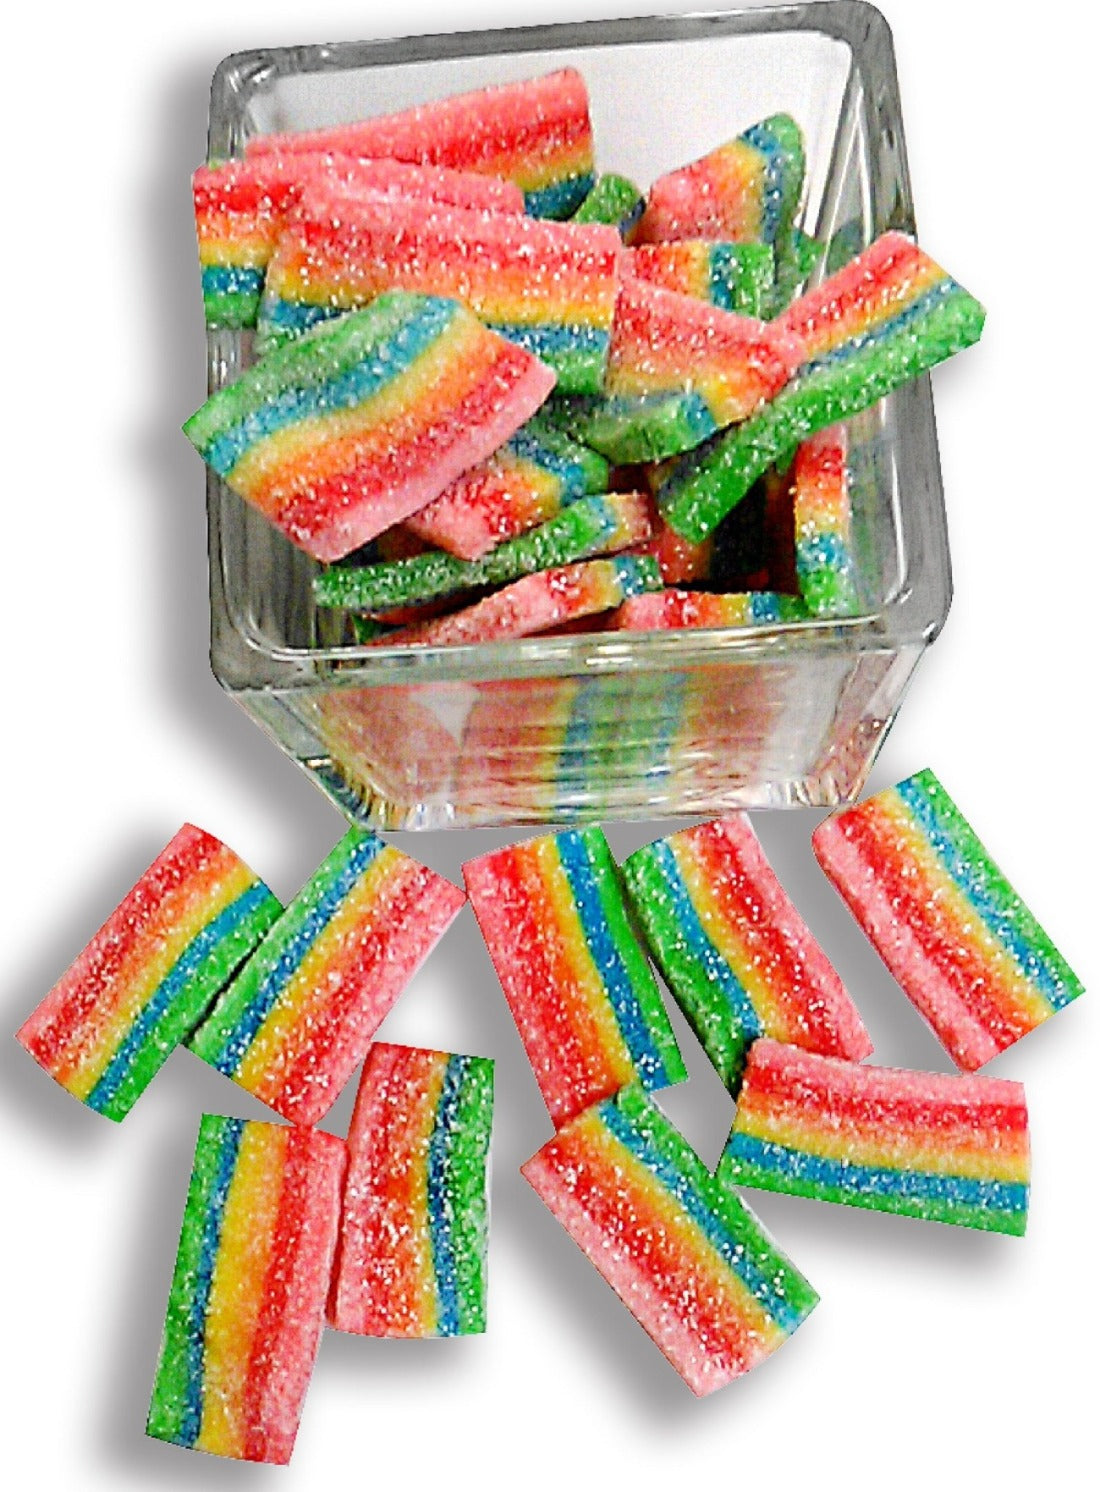 Caramelle Gommose Chewy Rainbow Fini 1 kg –